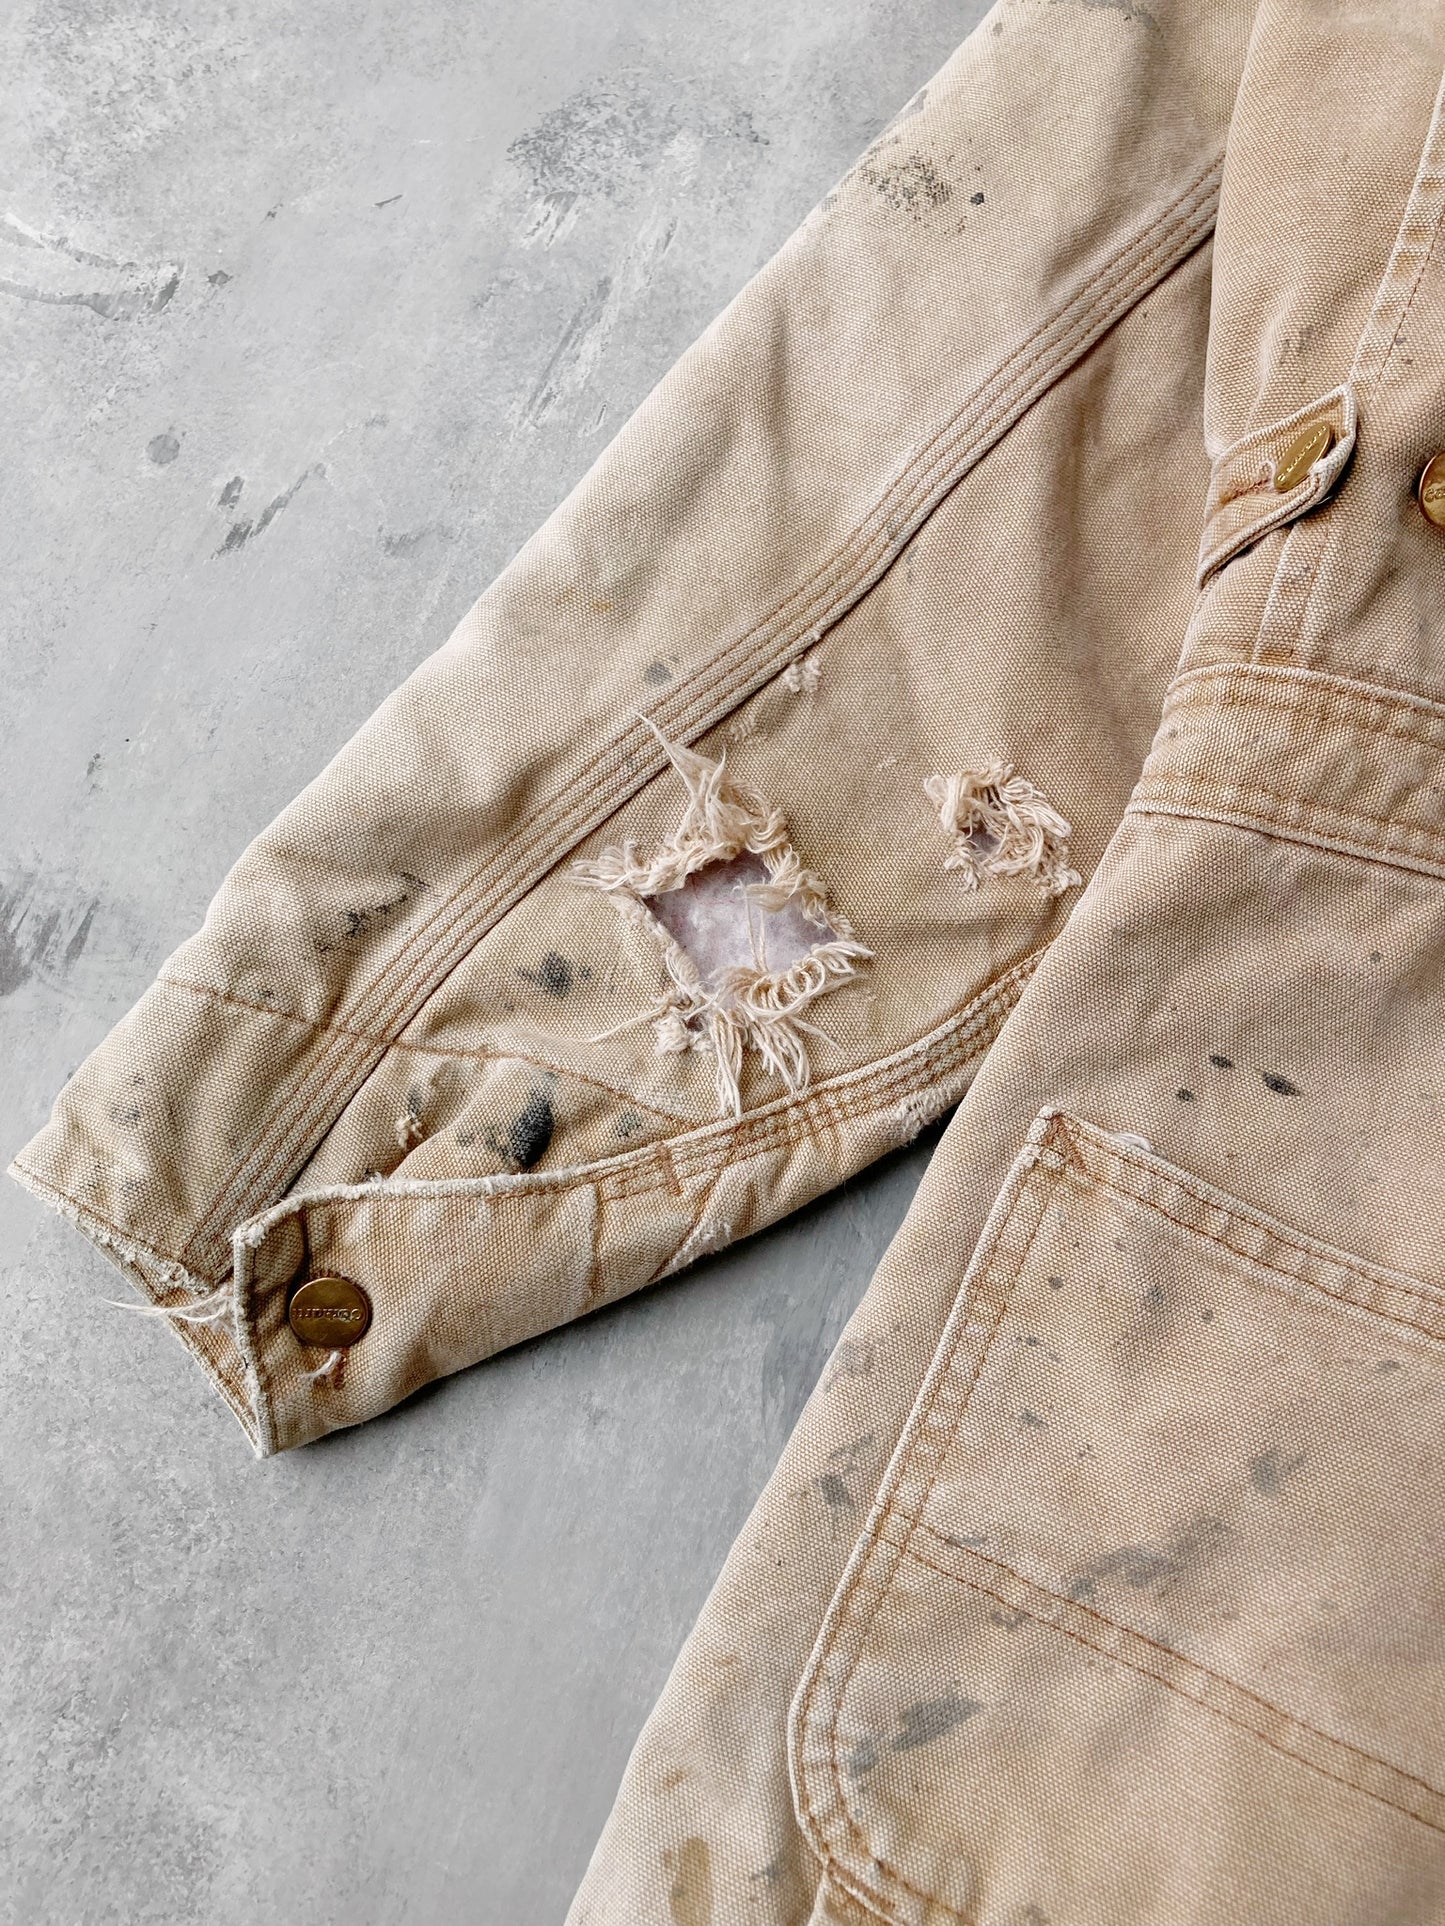 Thrashed Carhartt Insulated Coveralls - Small